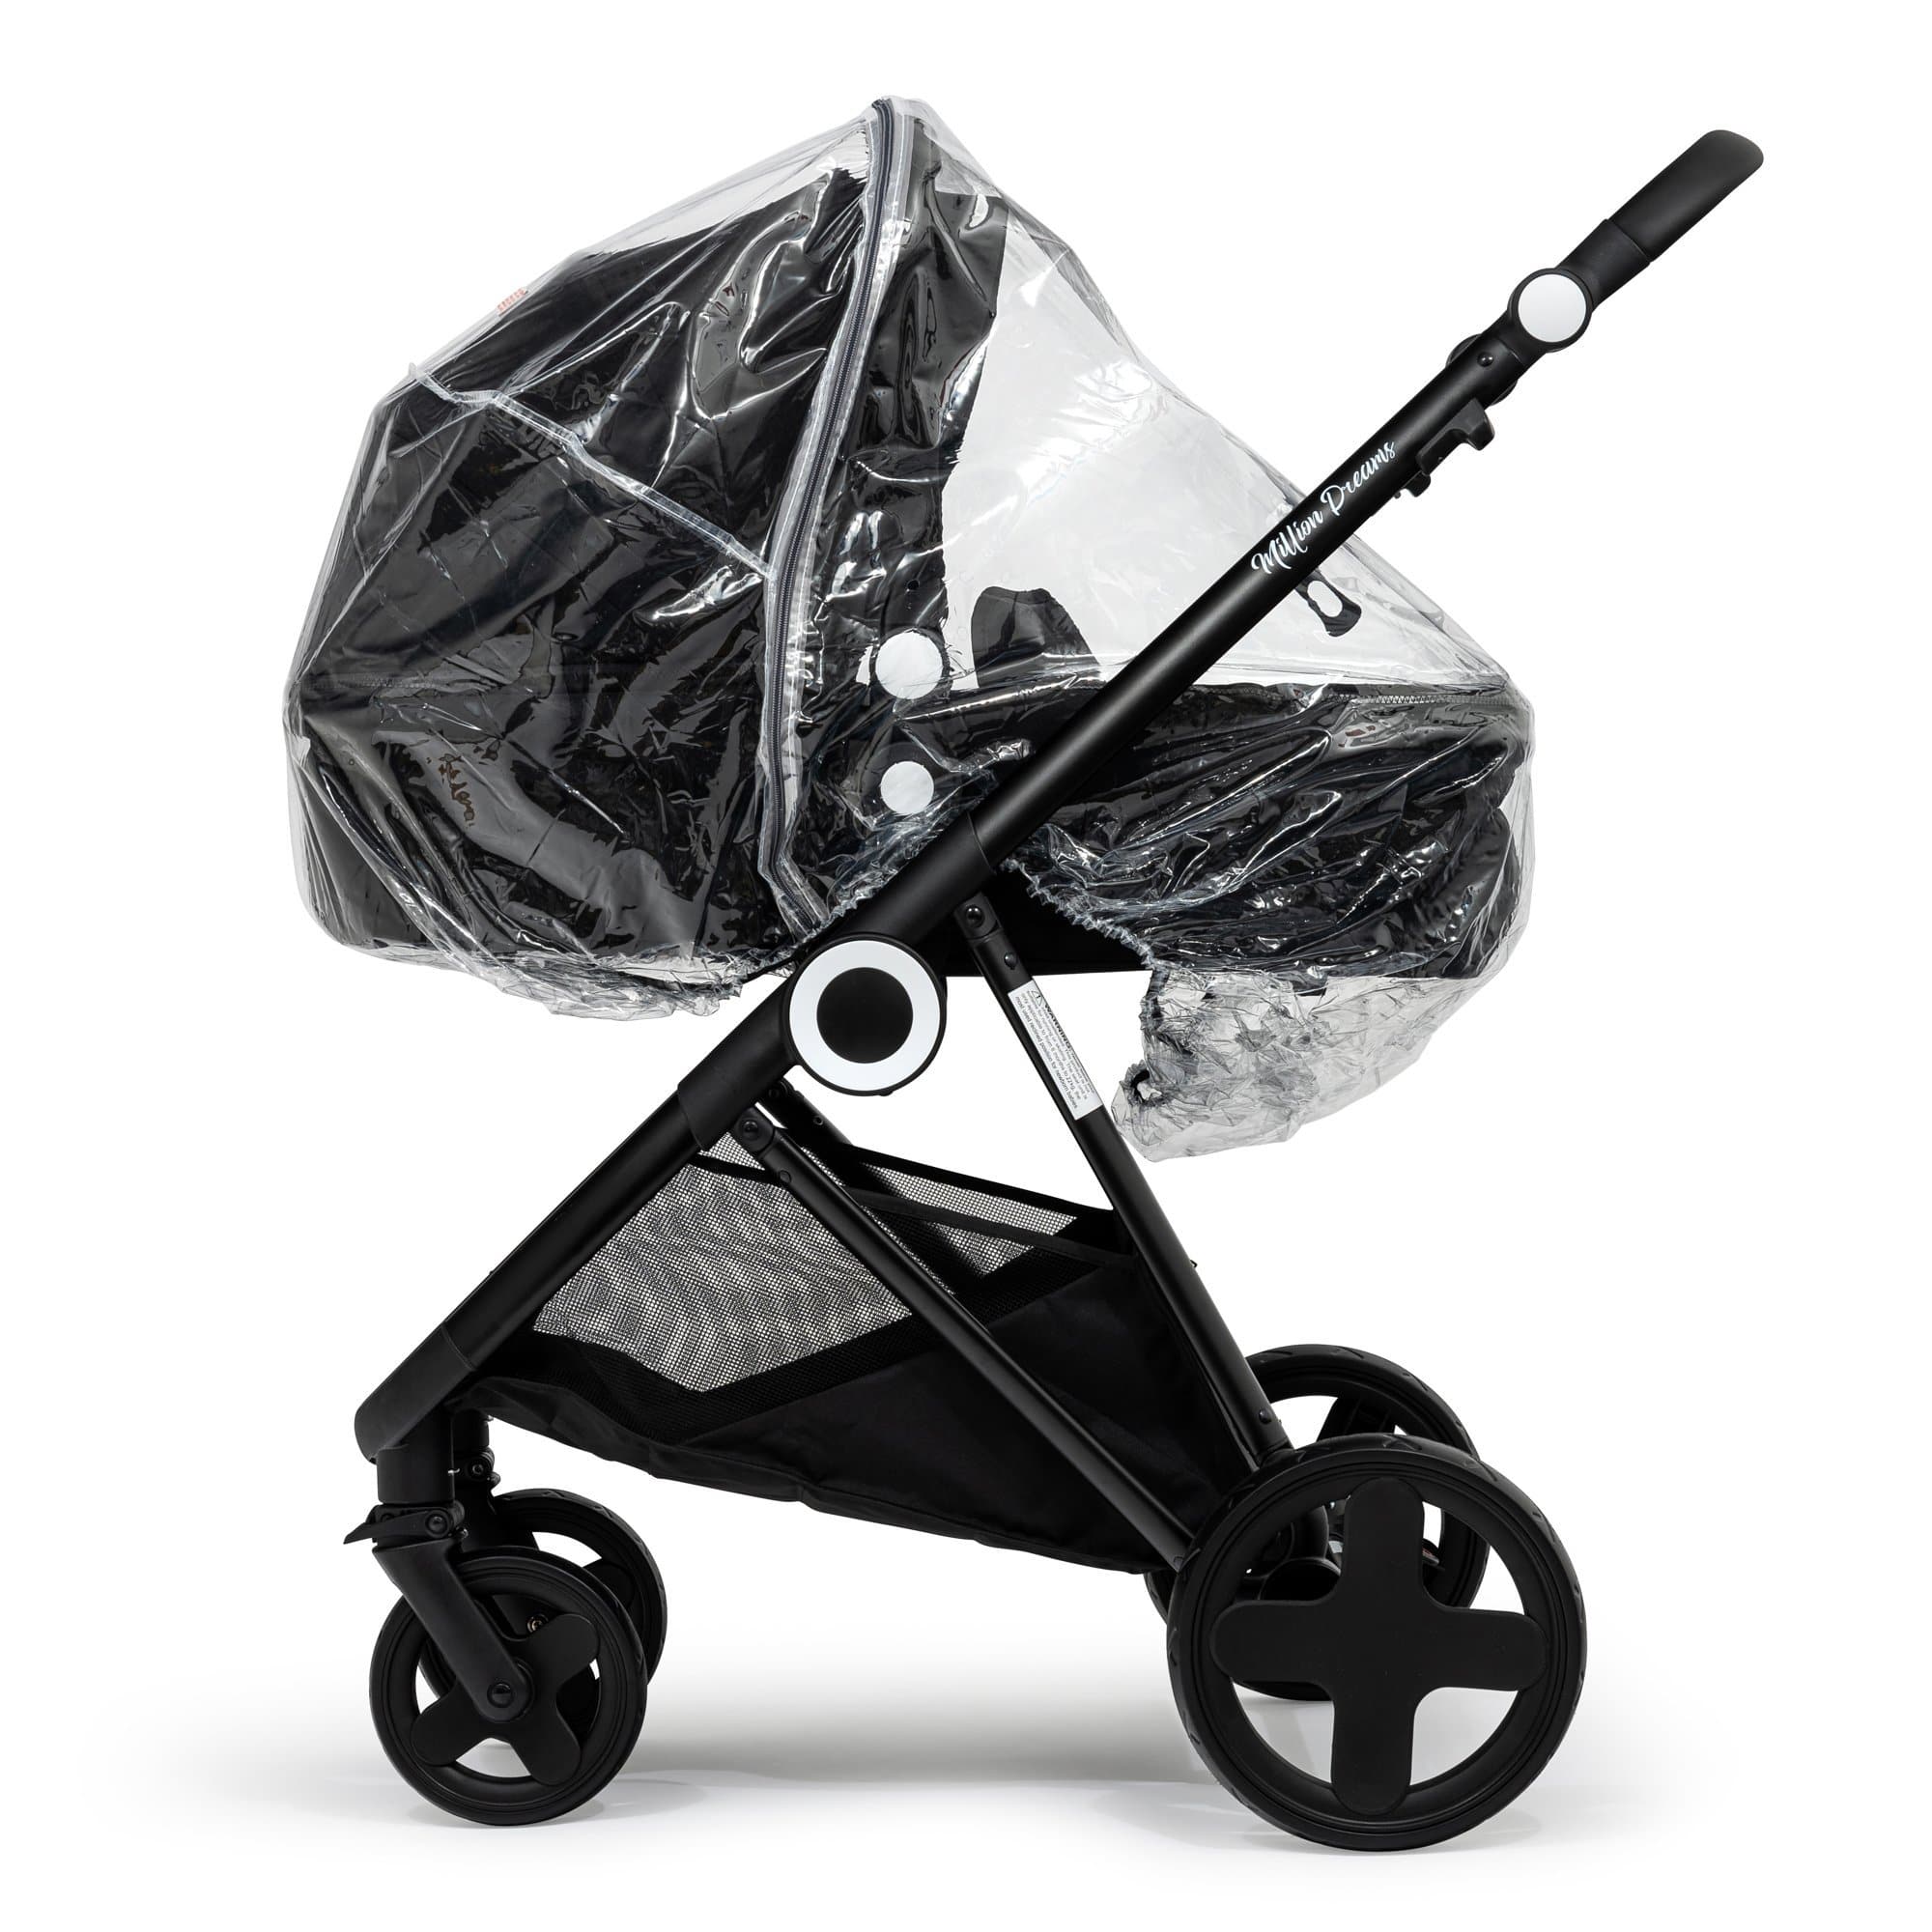 2 in 1 Rain Cover Compatible with GB - Fits All Models - For Your Little One